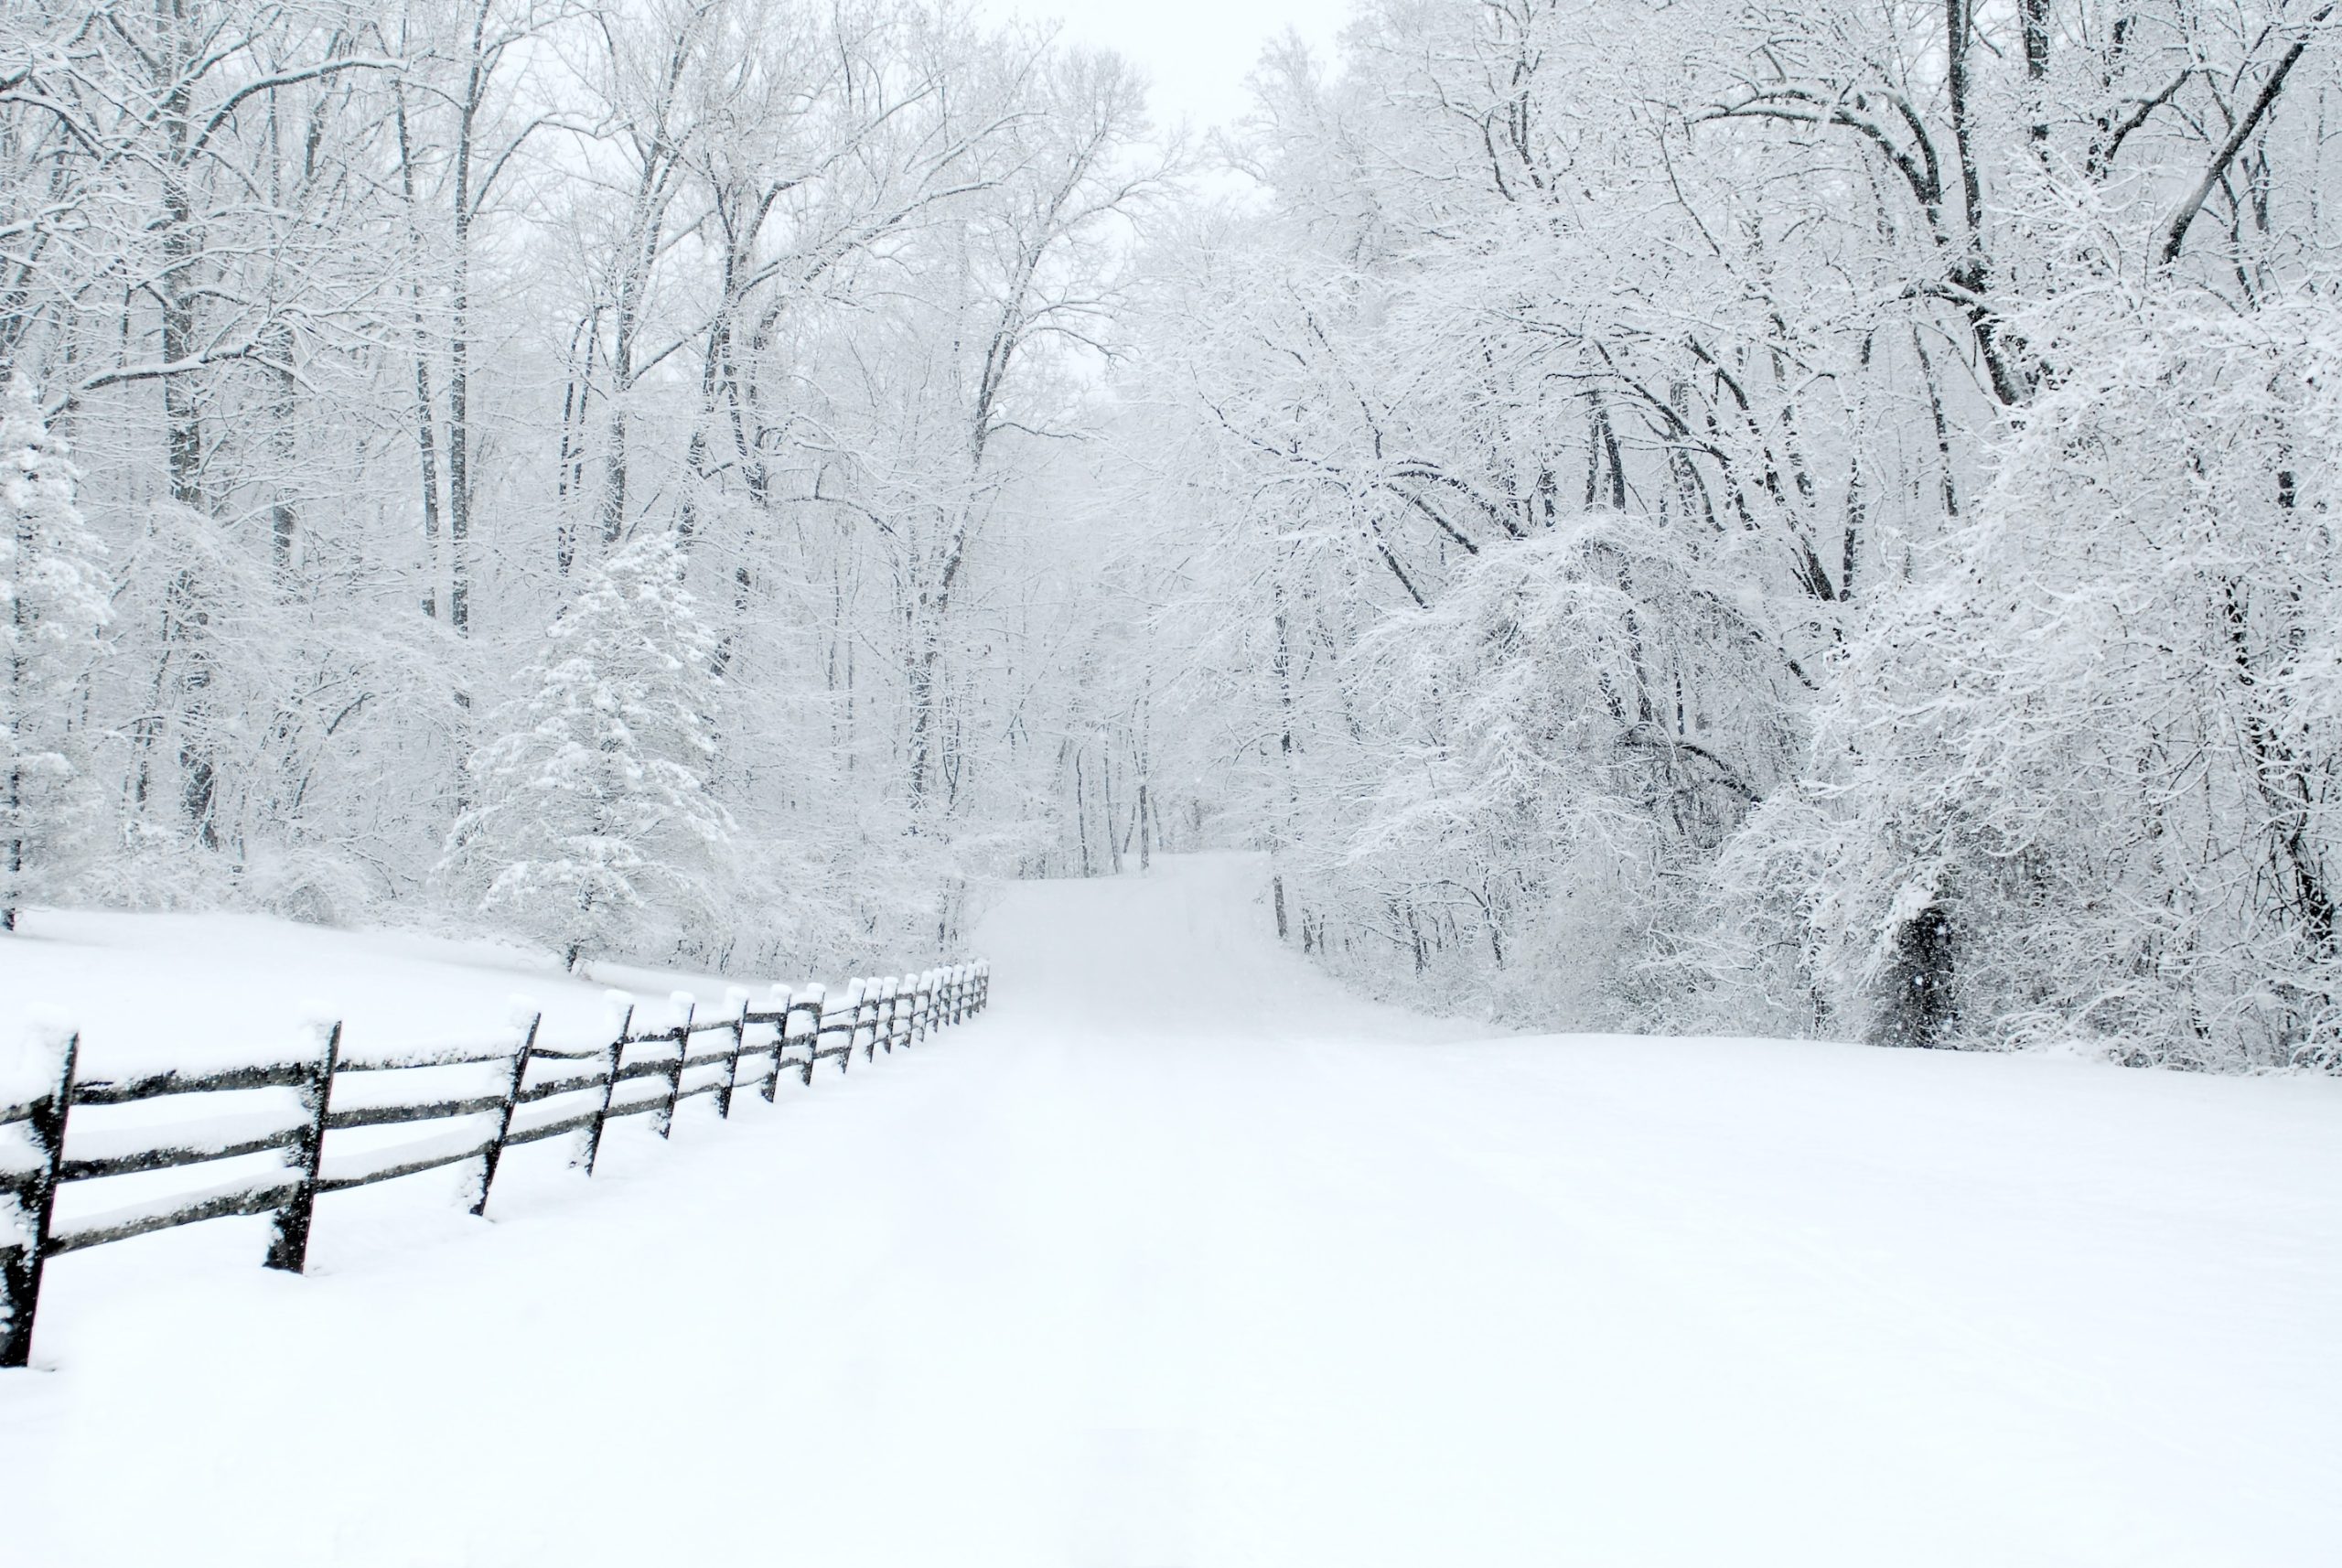 Snow storm in Chester County by Annie Nyle on Unsplash